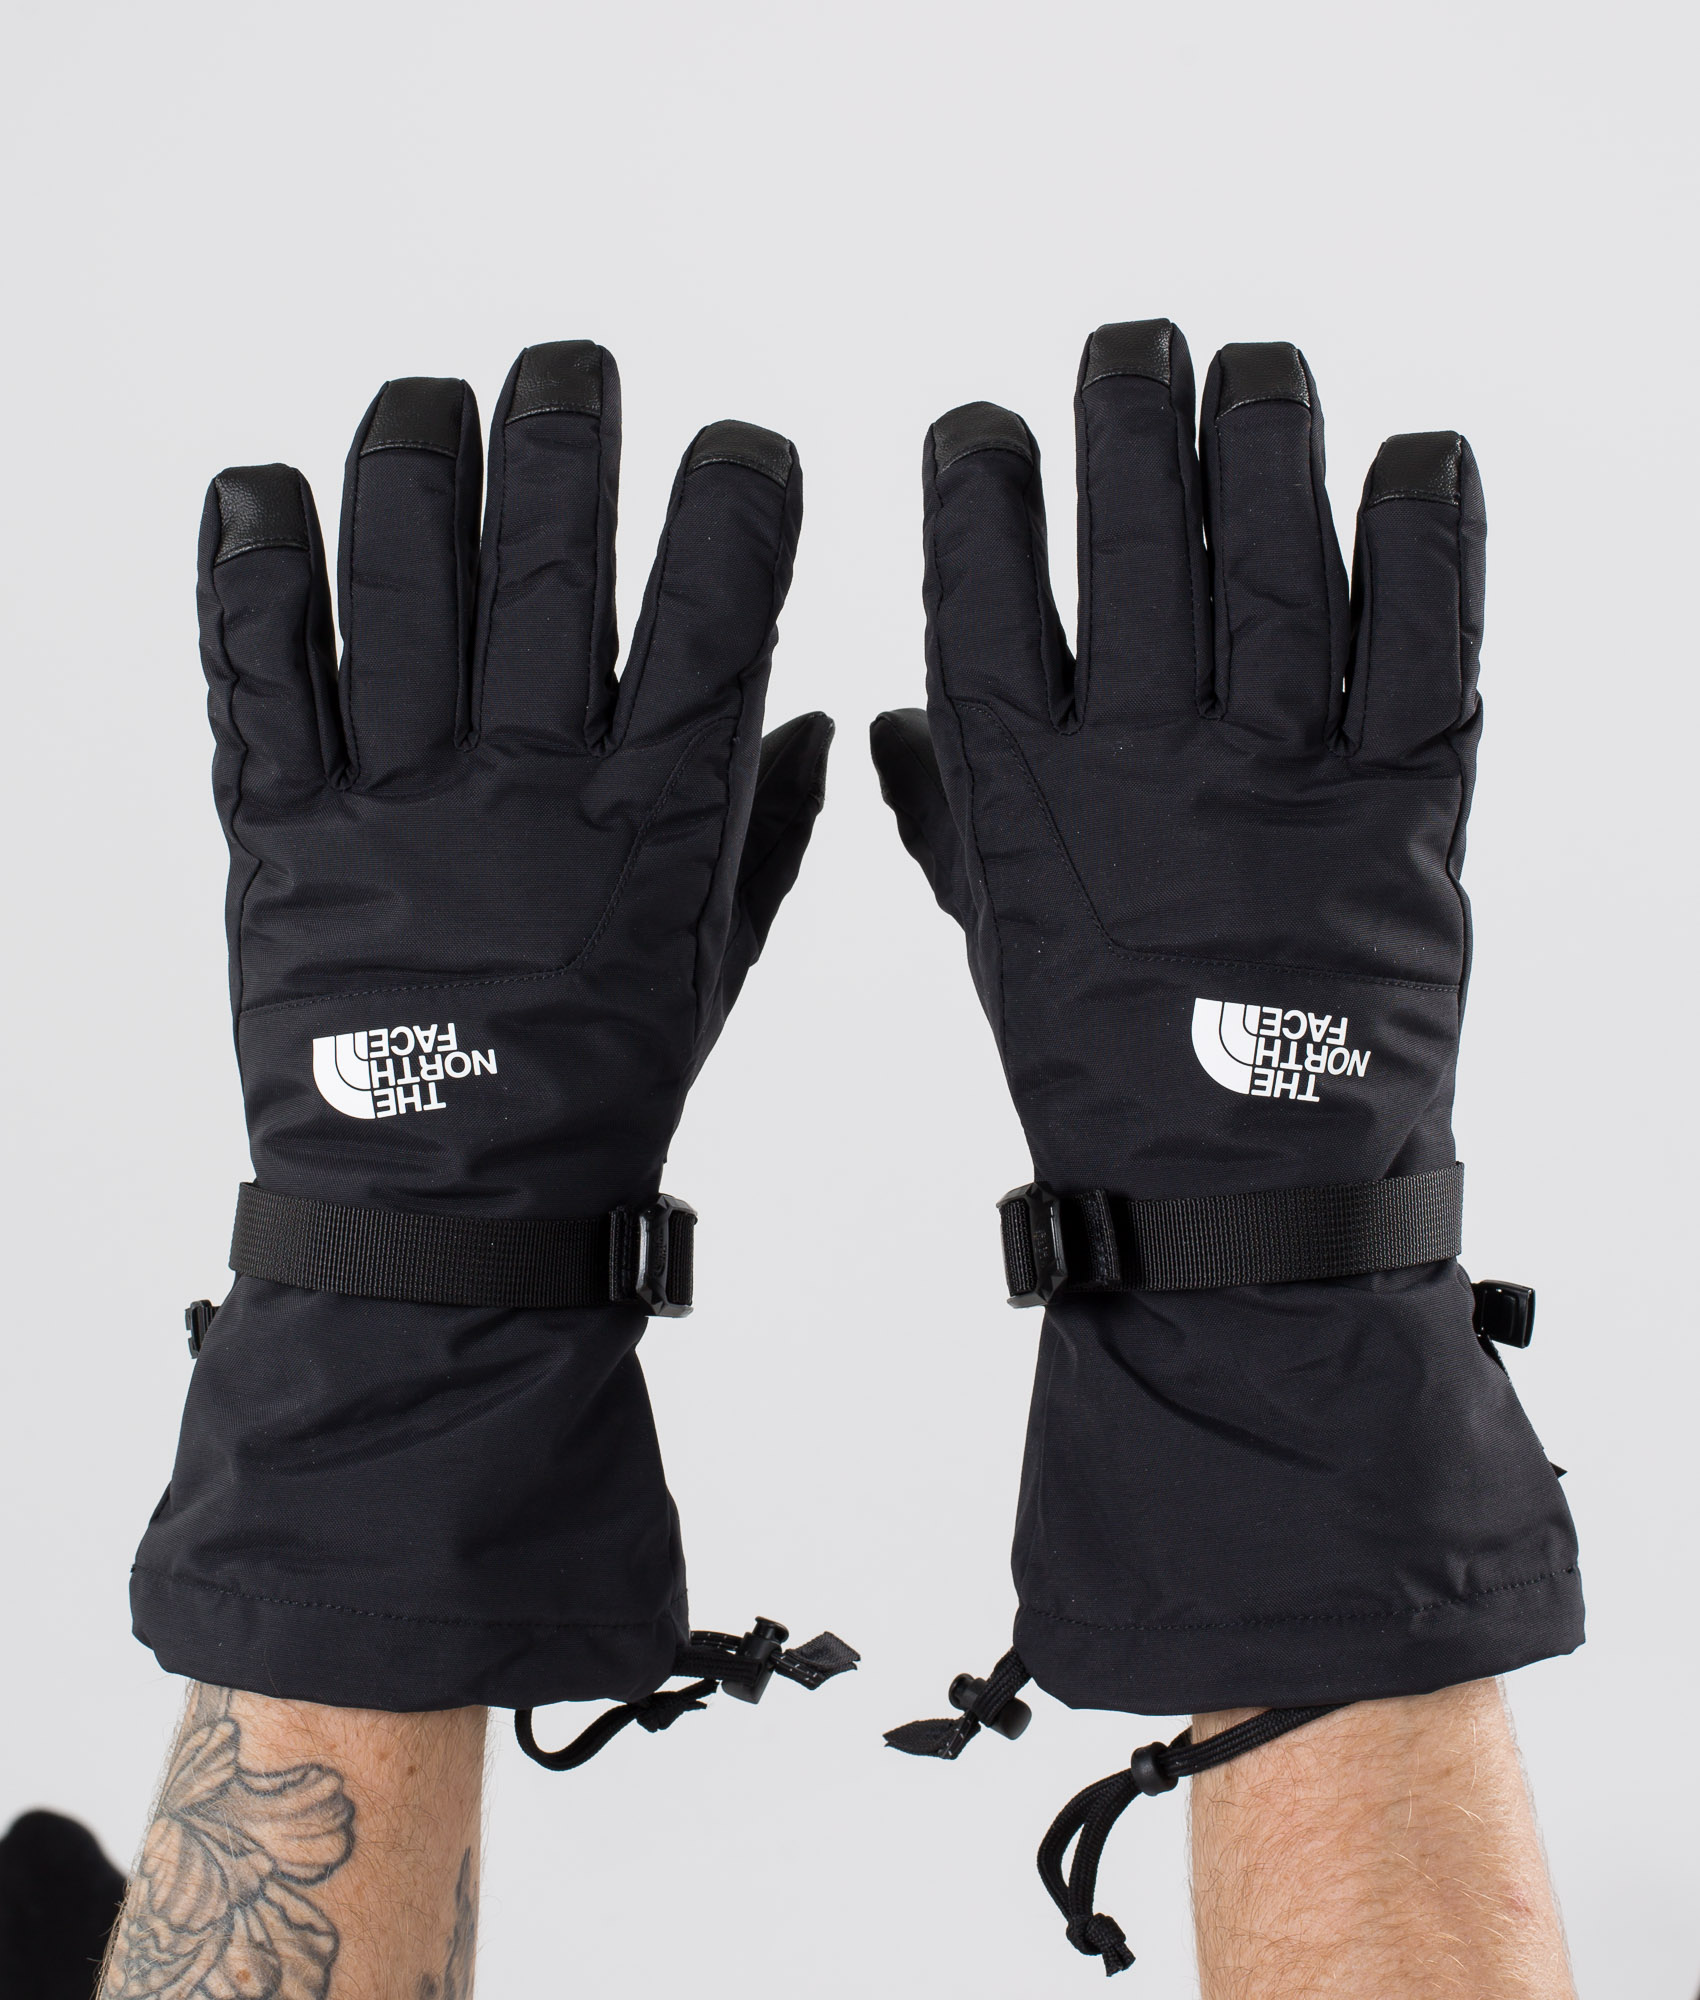 the north face ski gloves